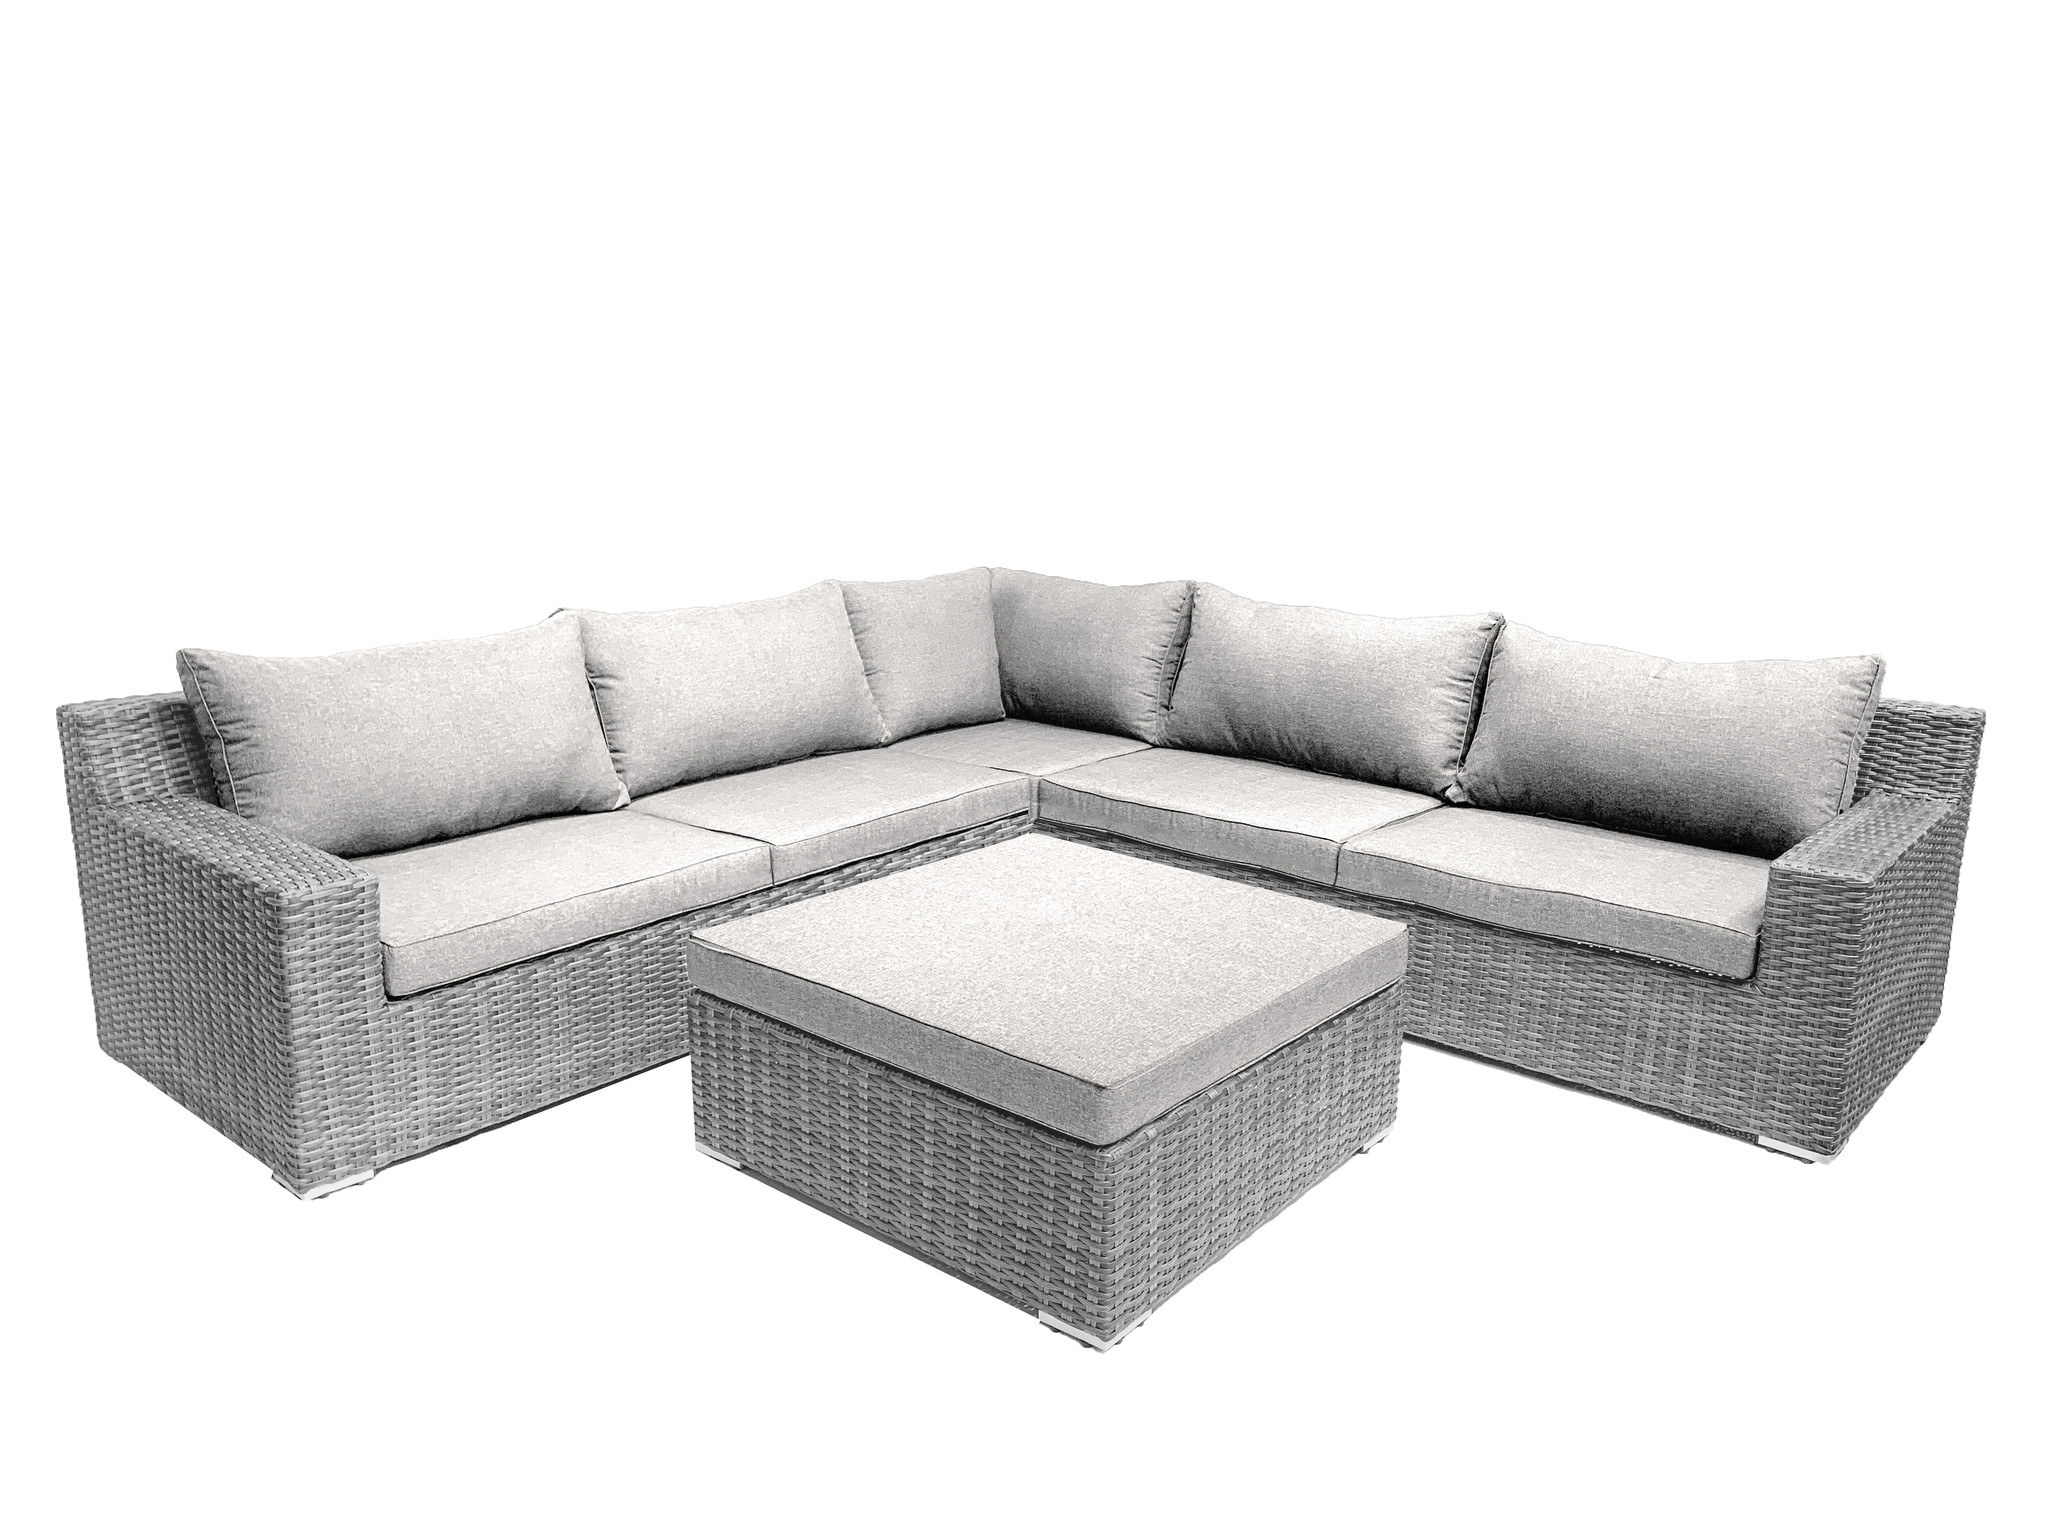 7-person lounge set Colorado Blended Gray with beige cushions | Garden |  Garden Furniture - Yellow Webshop